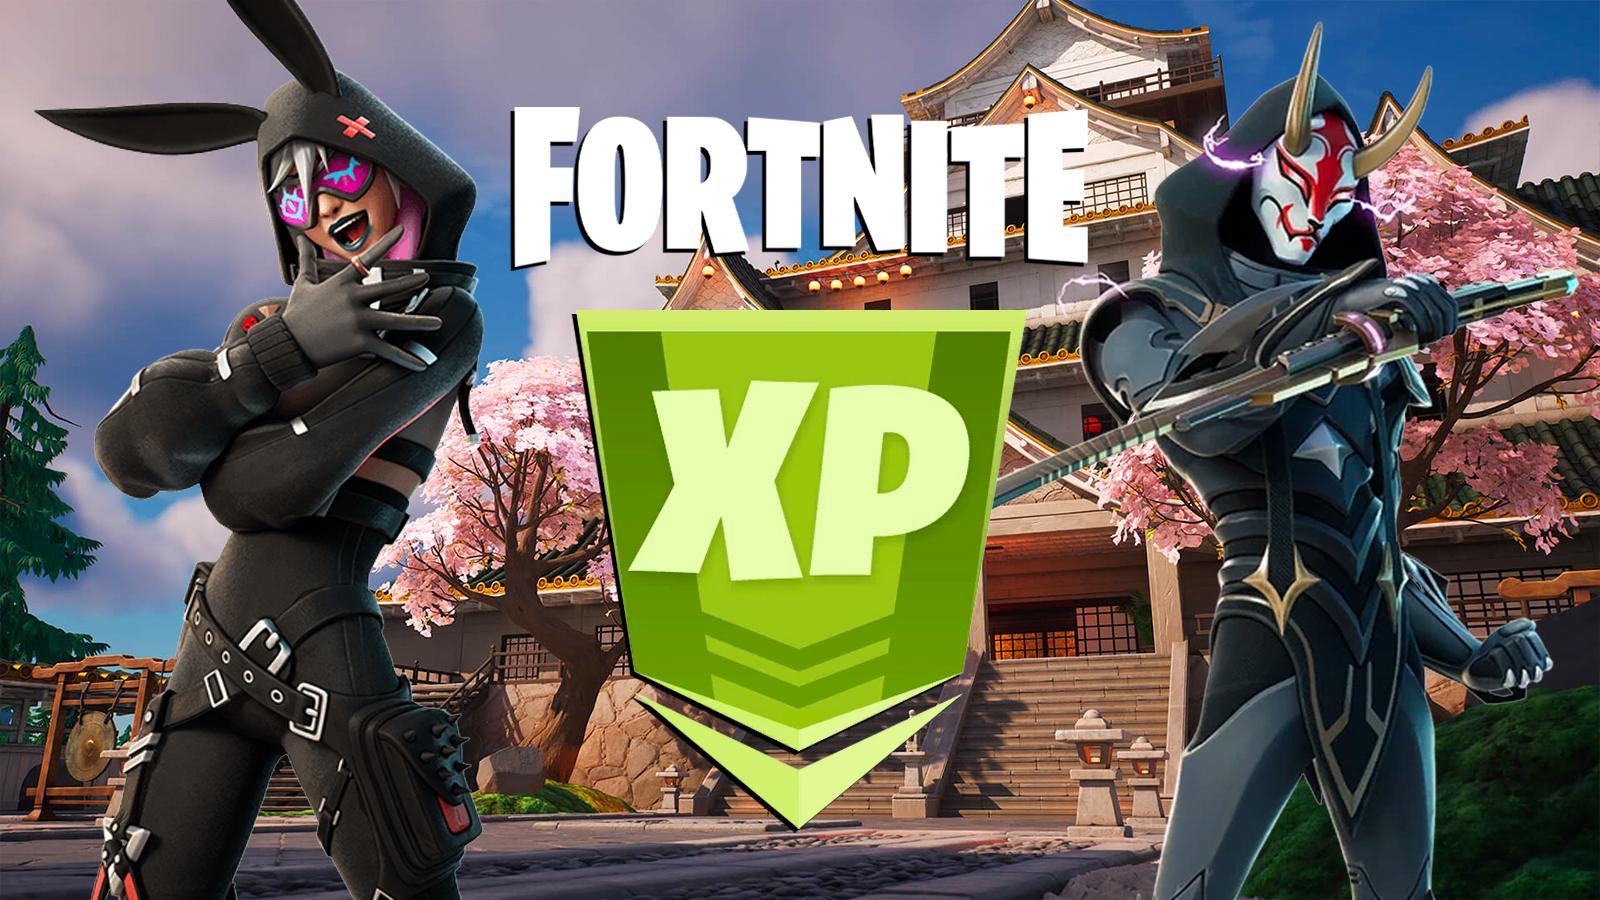 Fortnite characters next to a level up XP token